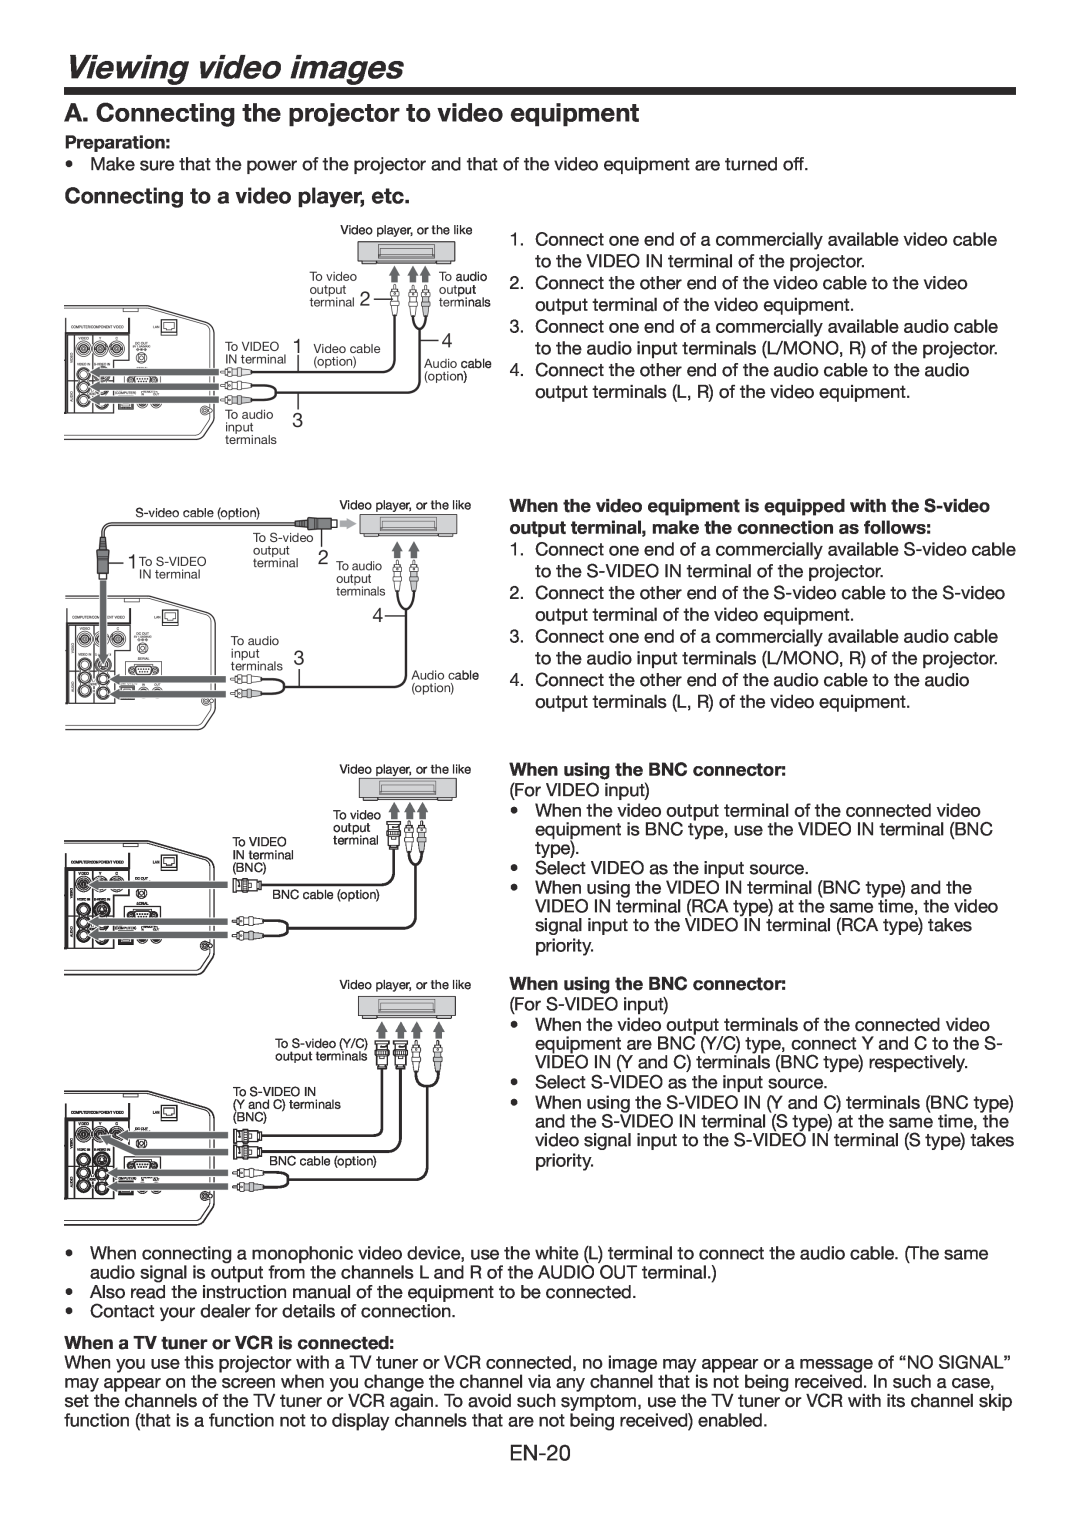 Mitsumi electronic WD3300U user manual Viewing video images, A. Connecting the projector to video equipment, Preparation 